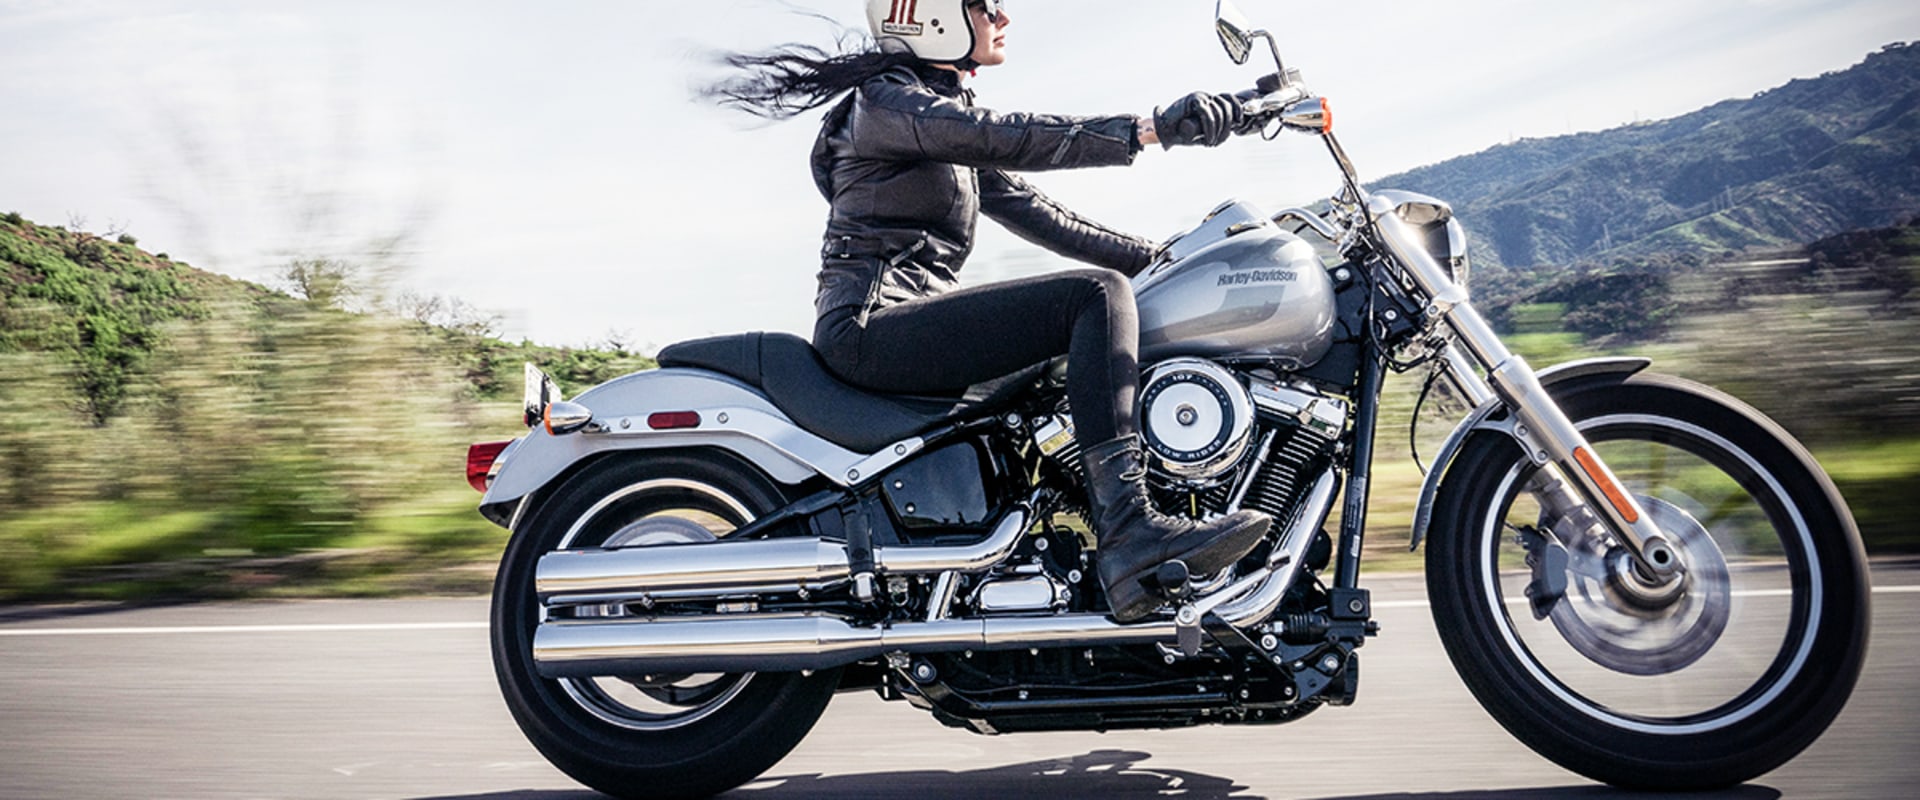 Does Motorcycle Insurance Cover Guest Passengers?